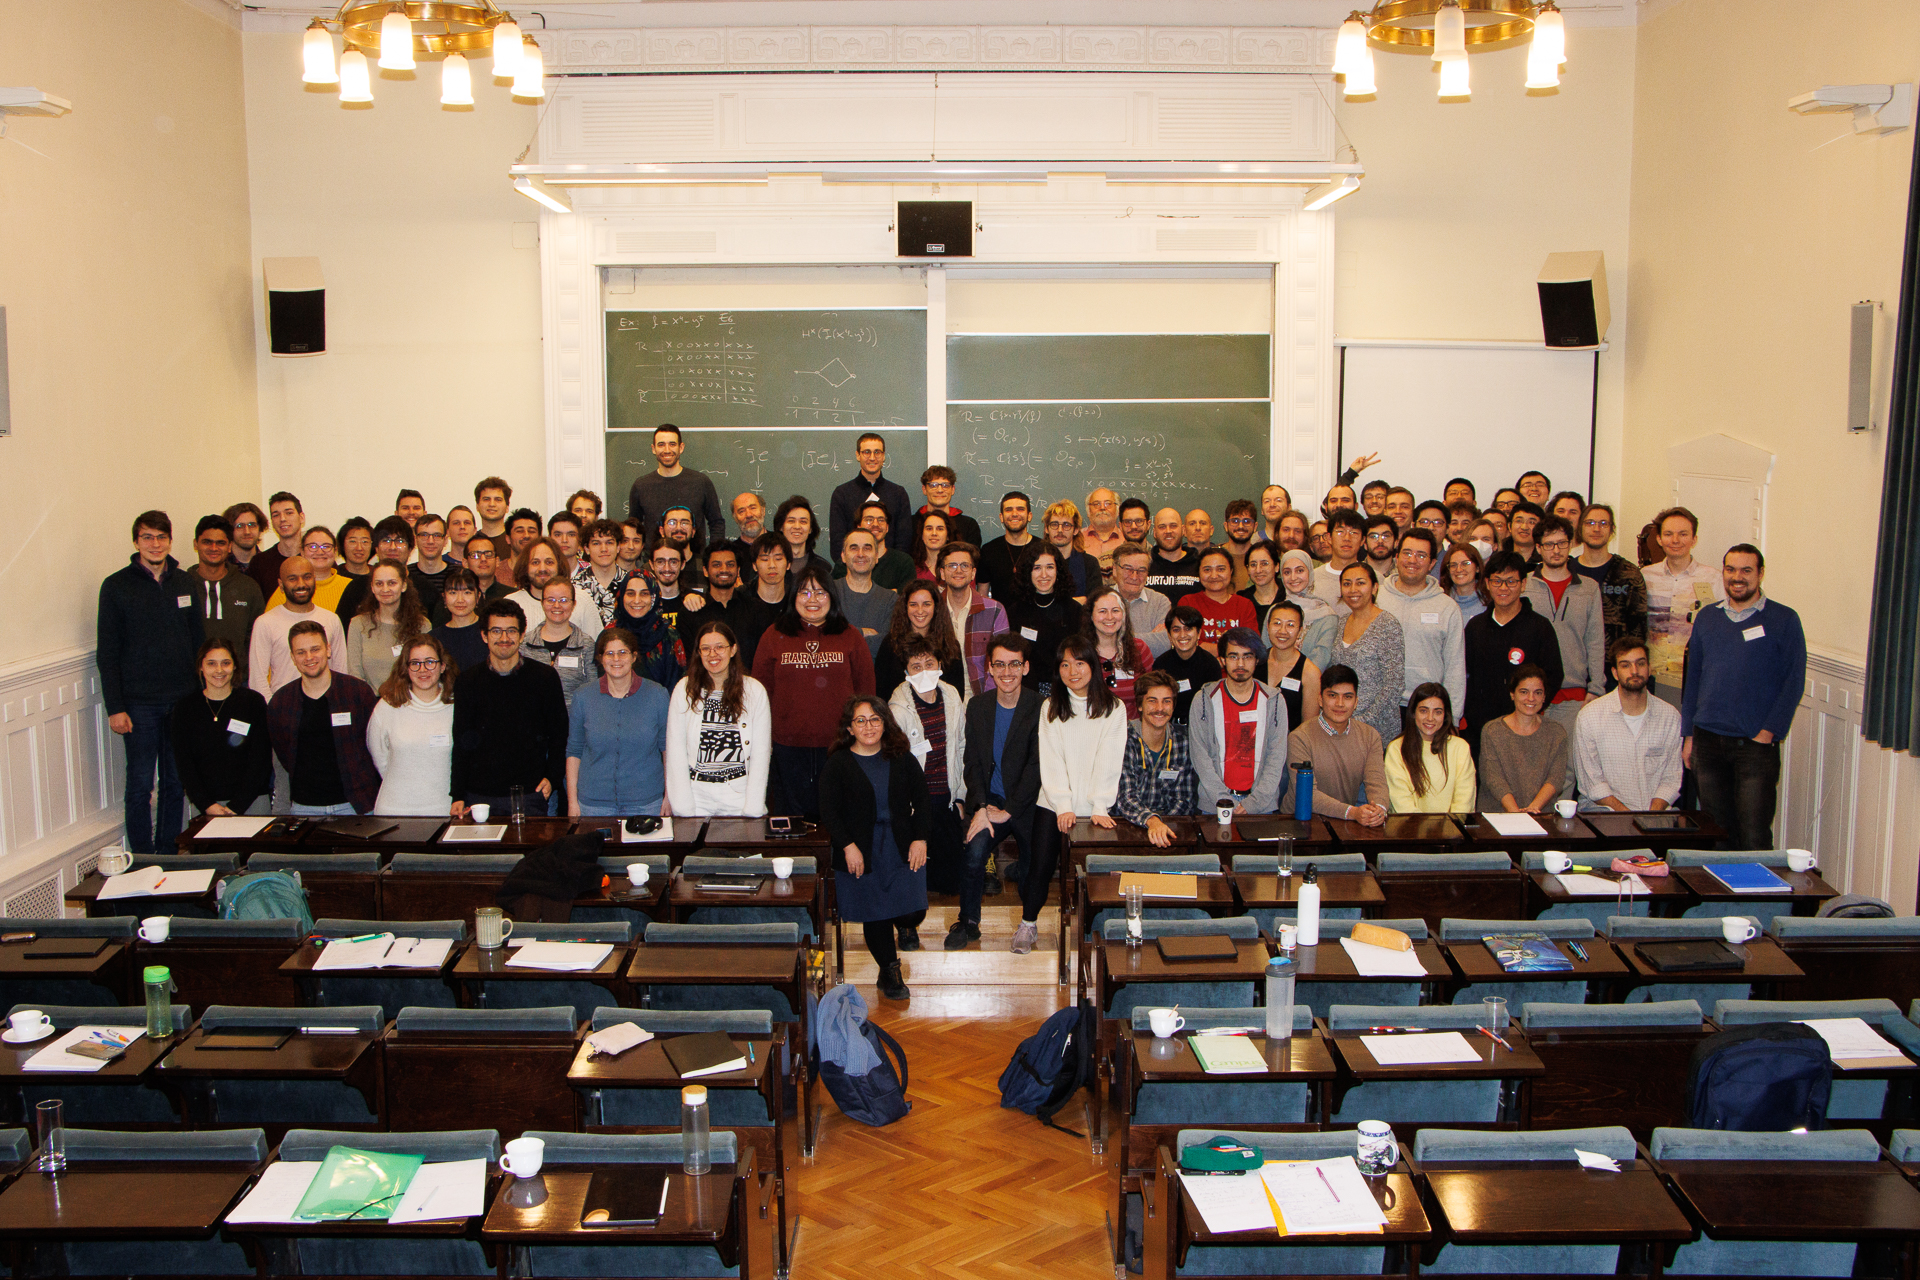 Group photo of the participants and organizers